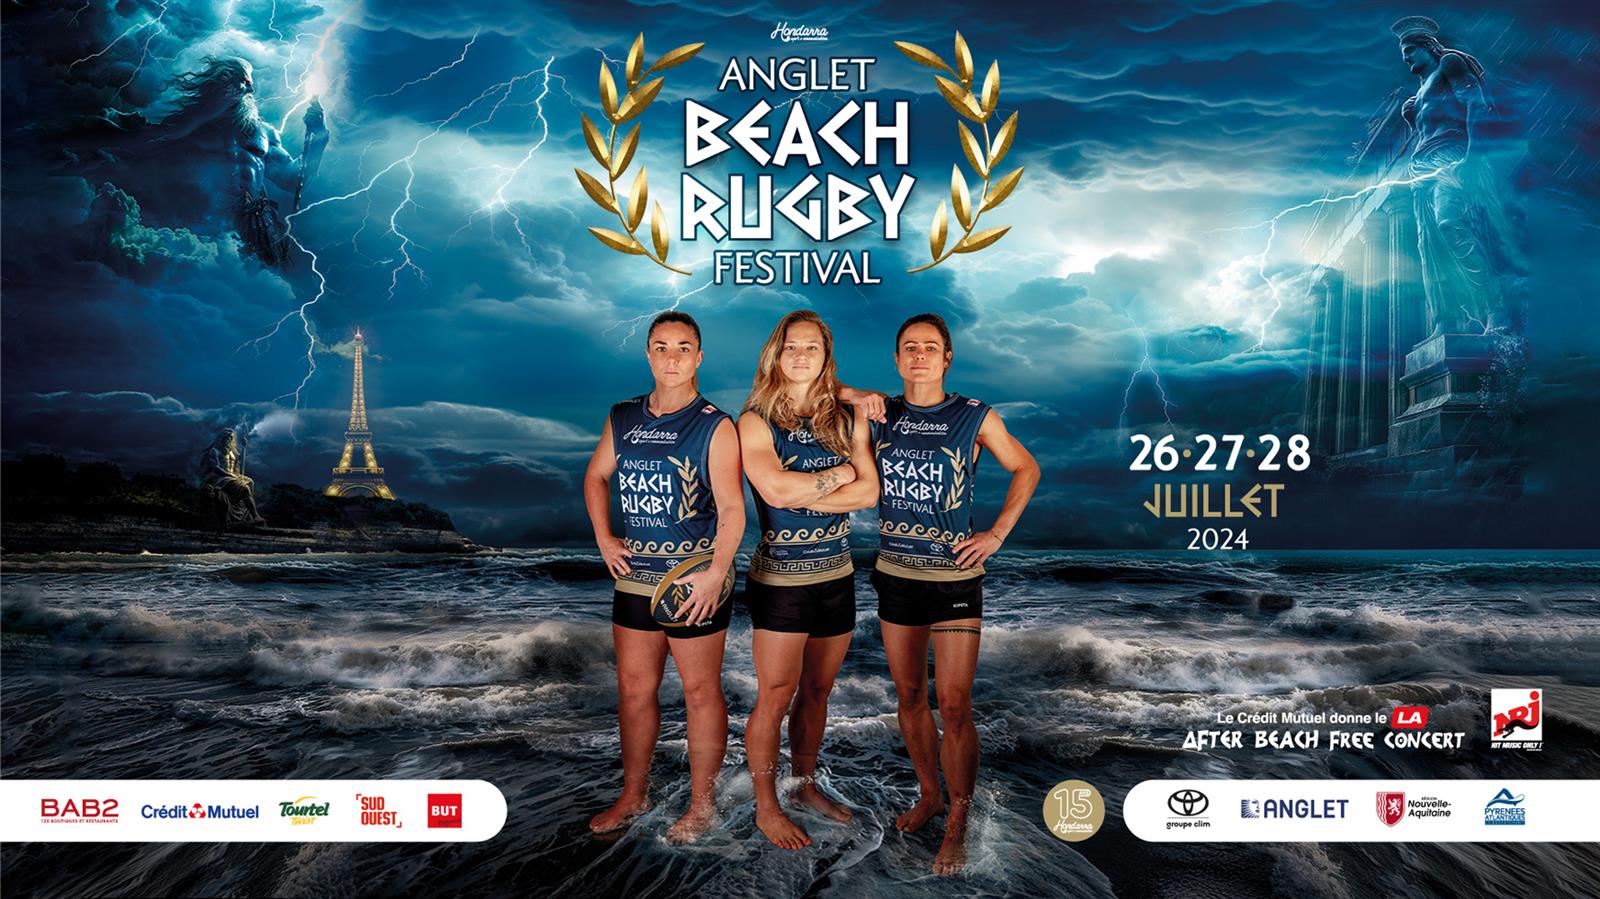 Anglet Beach Rugby Festival